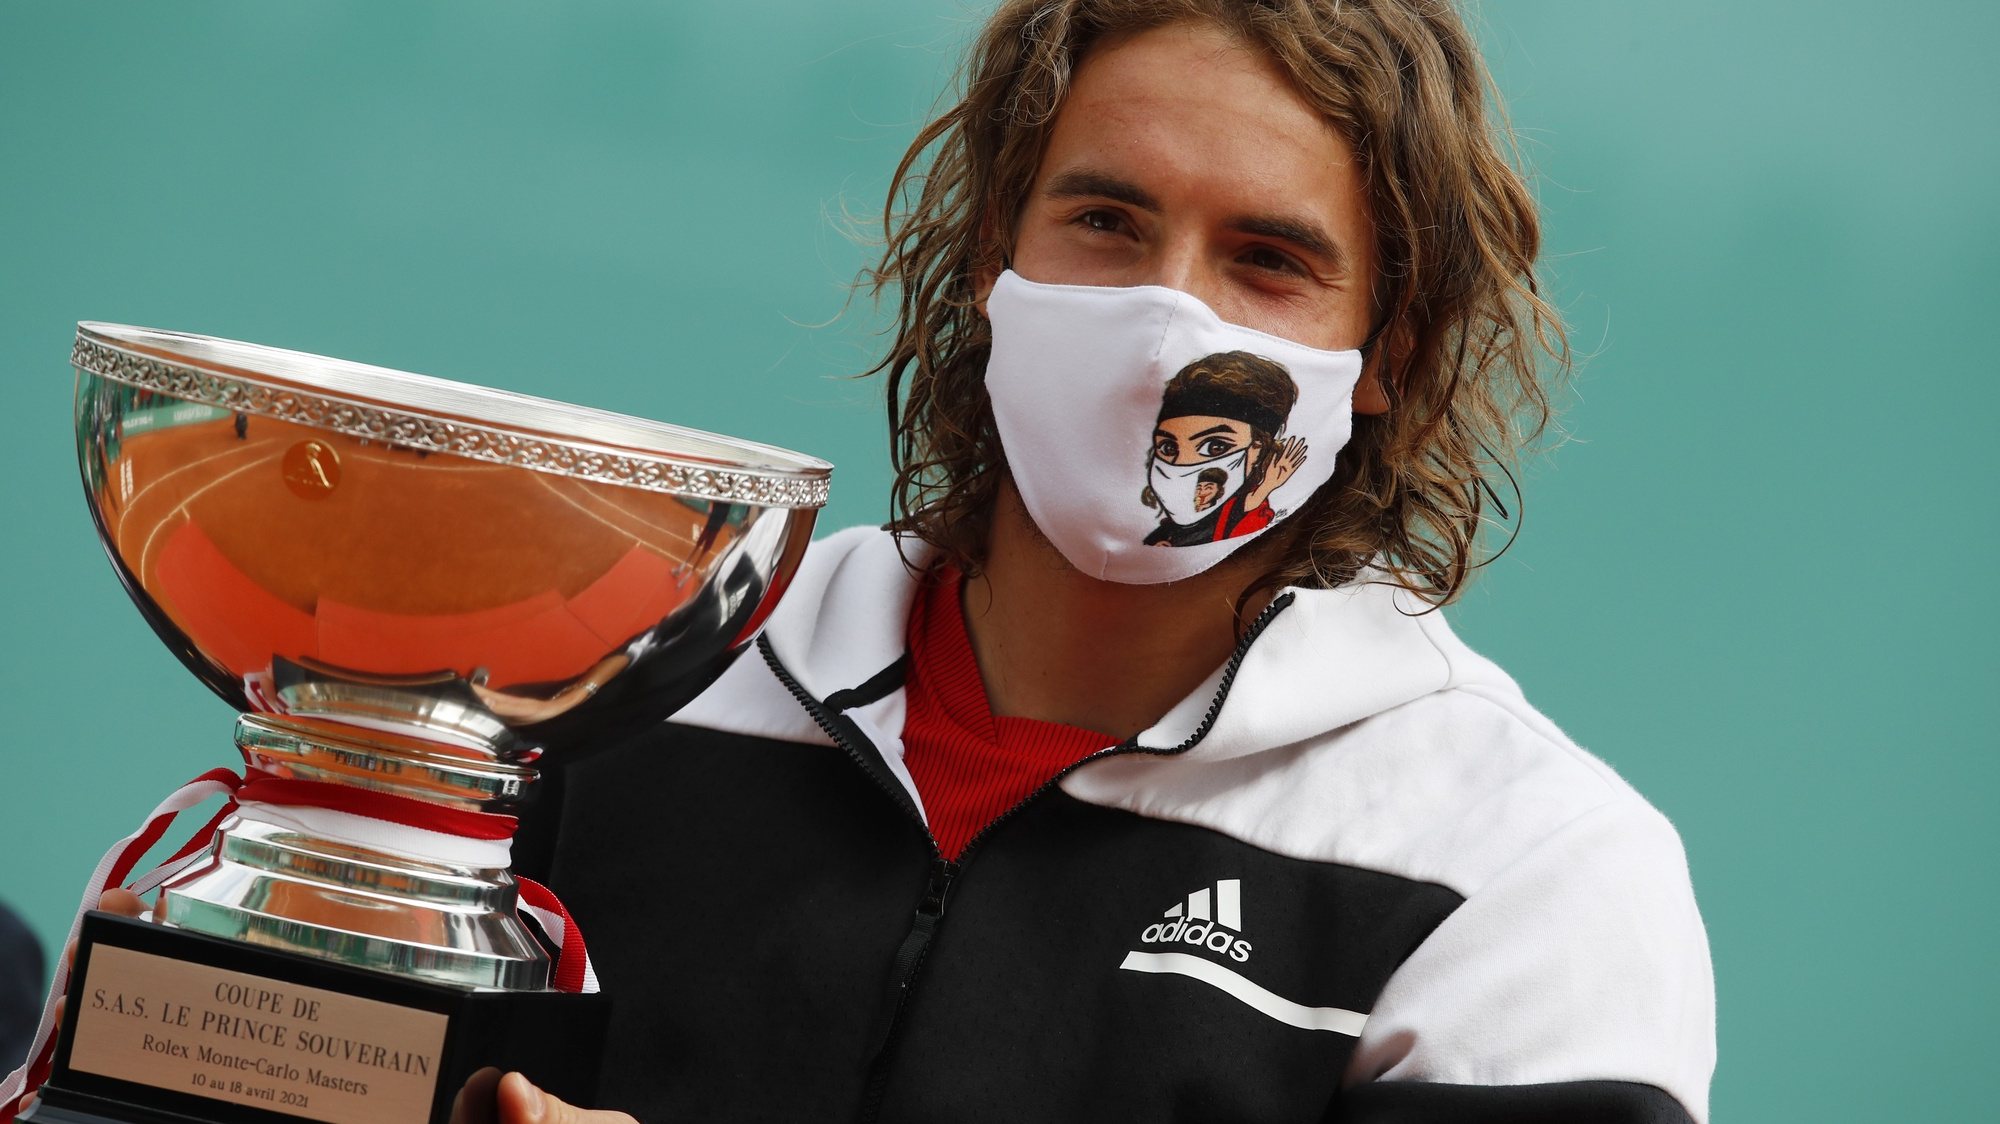 epa09143459 Stefanos Tsitsipas of Greece celebrates with the trophy after winning his final match against Andrey Rublev of Russia at the Monte-Carlo Rolex Masters tournament in Roquebrune Cap Martin, France, 18 April 2021.  EPA/SEBASTIEN NOGIER